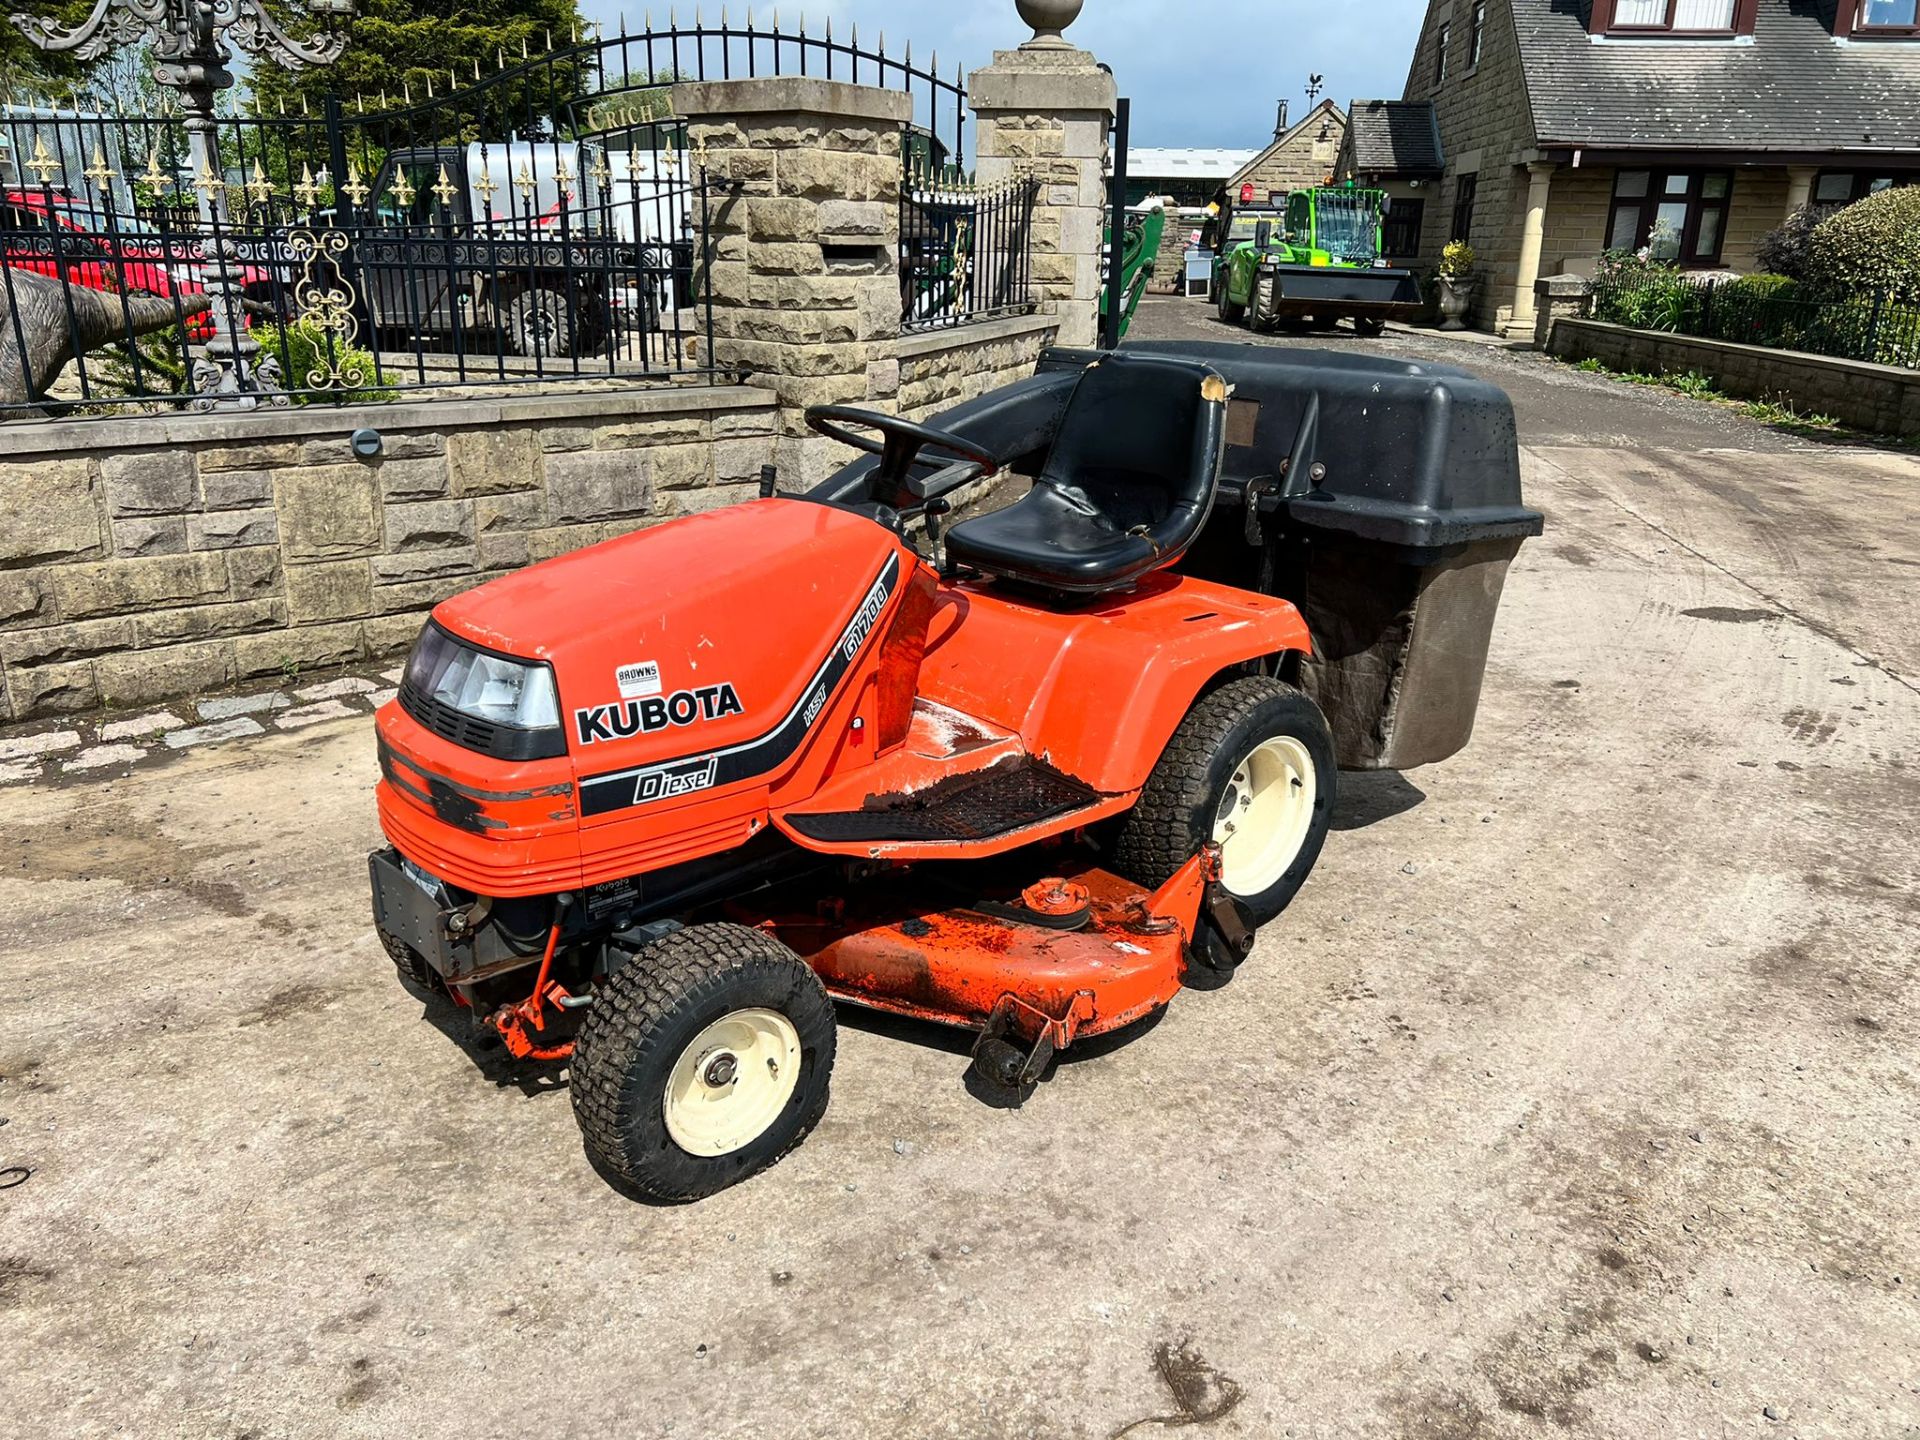 Kubota G1700 Diesel Ride On Mower With Rear Collector, Runs Drives And Cuts "NOVAT"